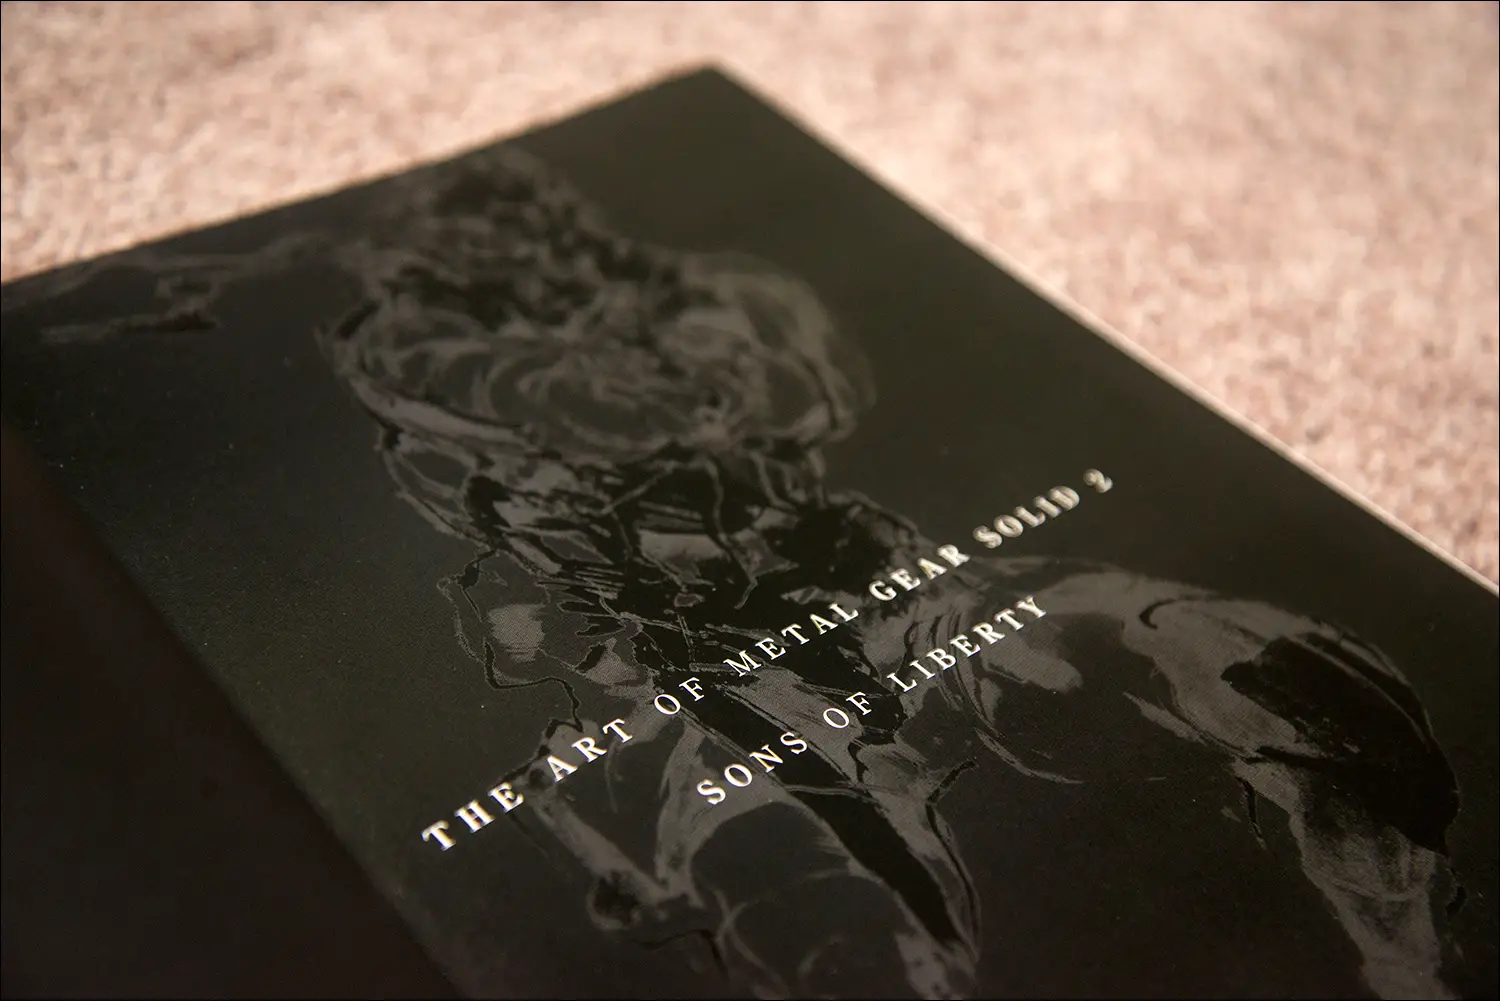 The-Art-of-Metal-Gear-Solid-2-Title-Page